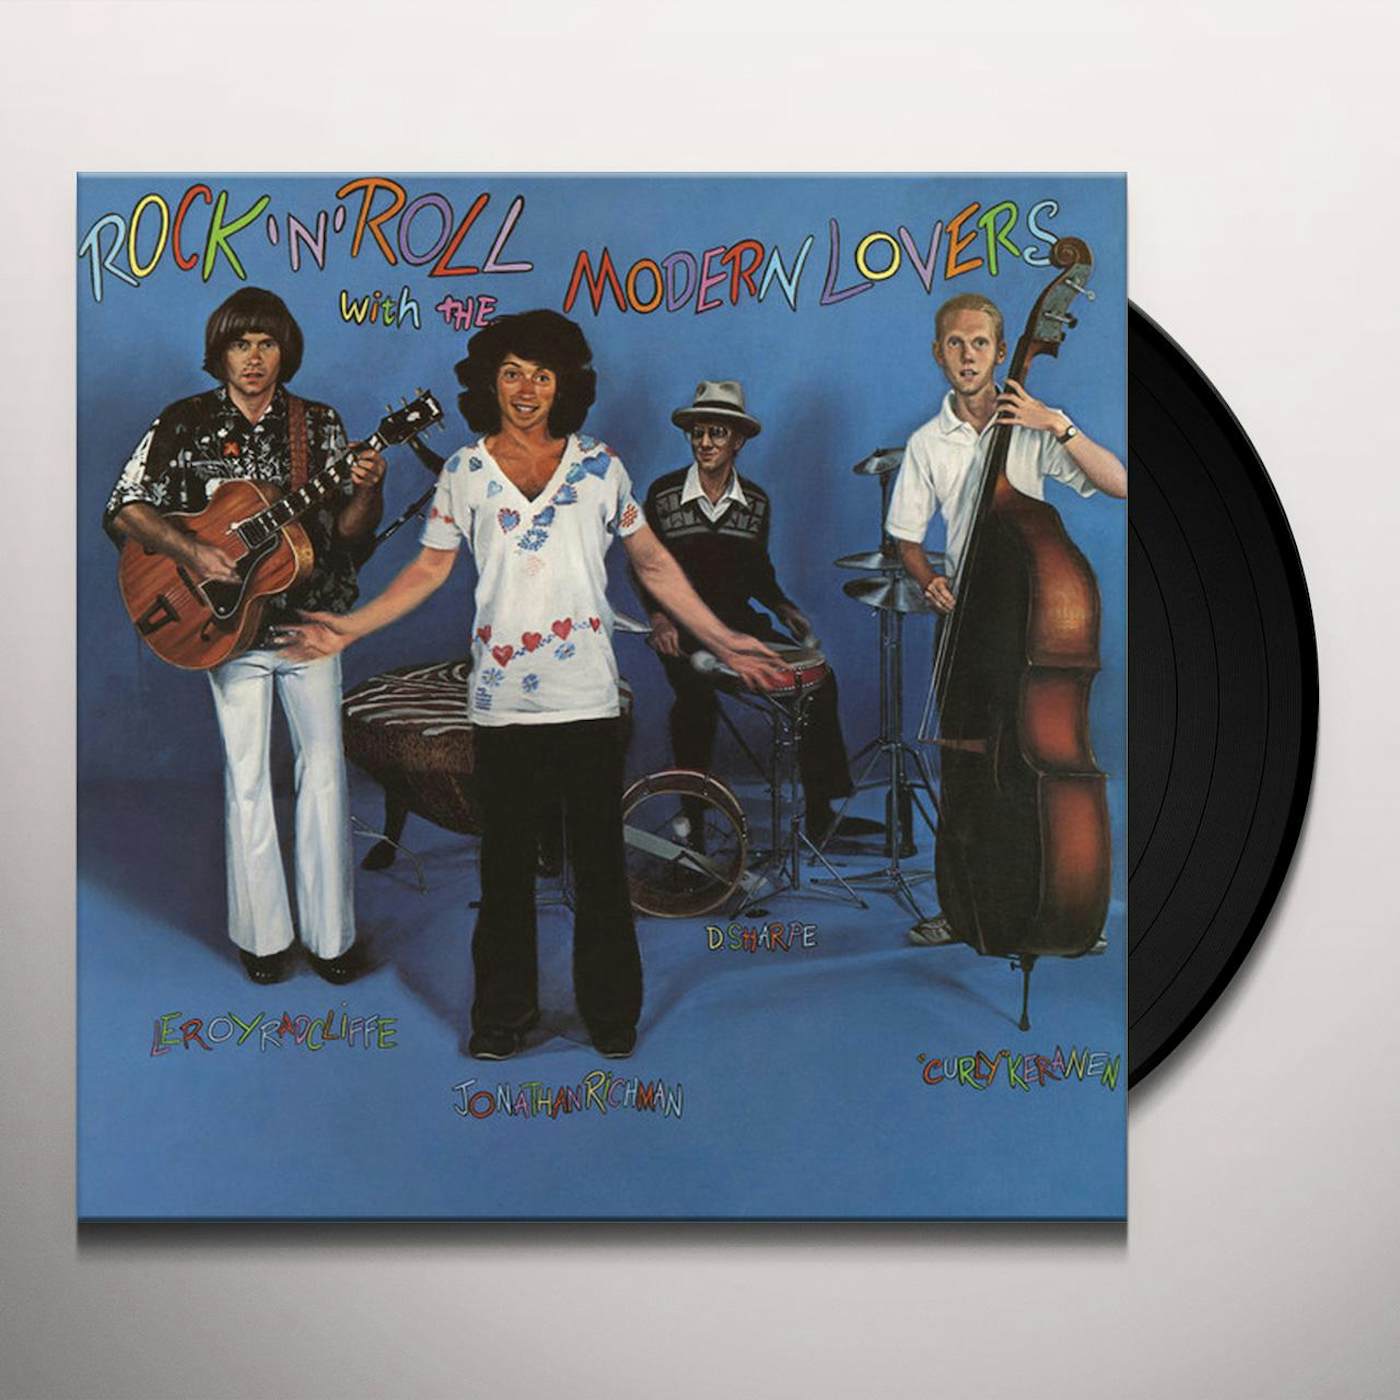 Jonathan Richman & The Modern Lovers ROCK N ROLL WITH THE MODERN LOVERS Vinyl Record